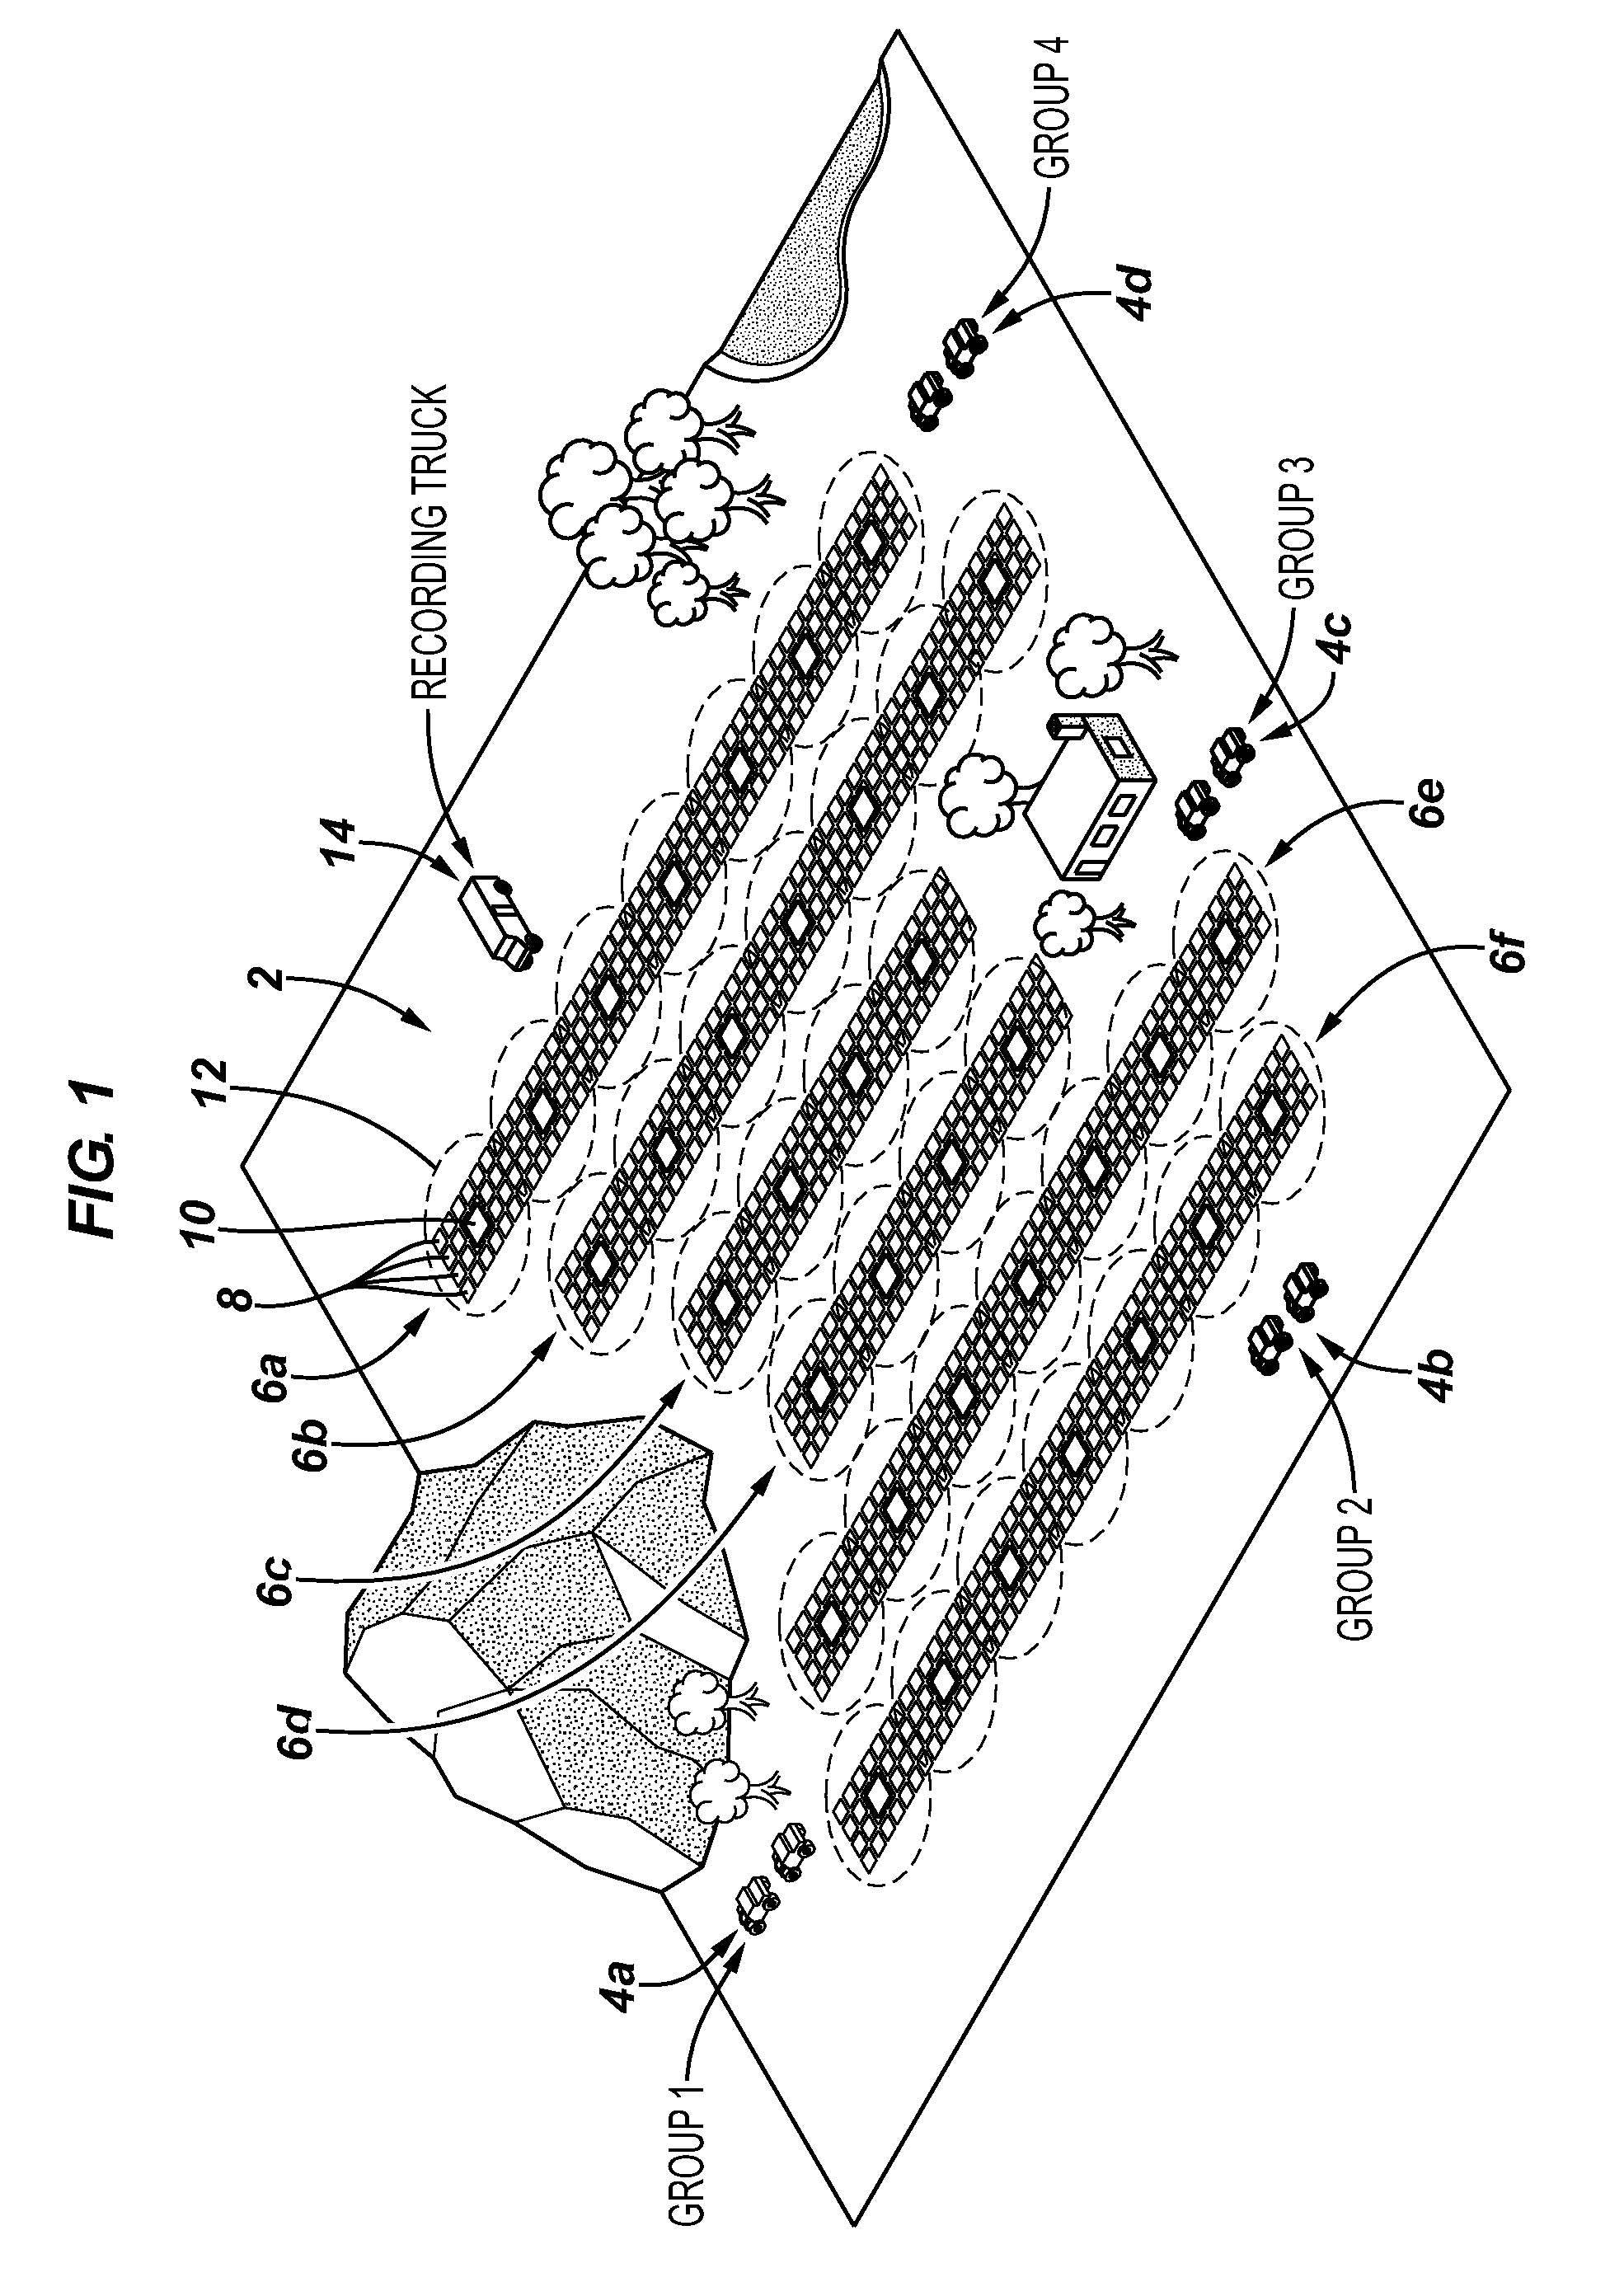 Systems and Methods for Seismic Data Acquisition Employing Clock Source Selection in Seismic Nodes